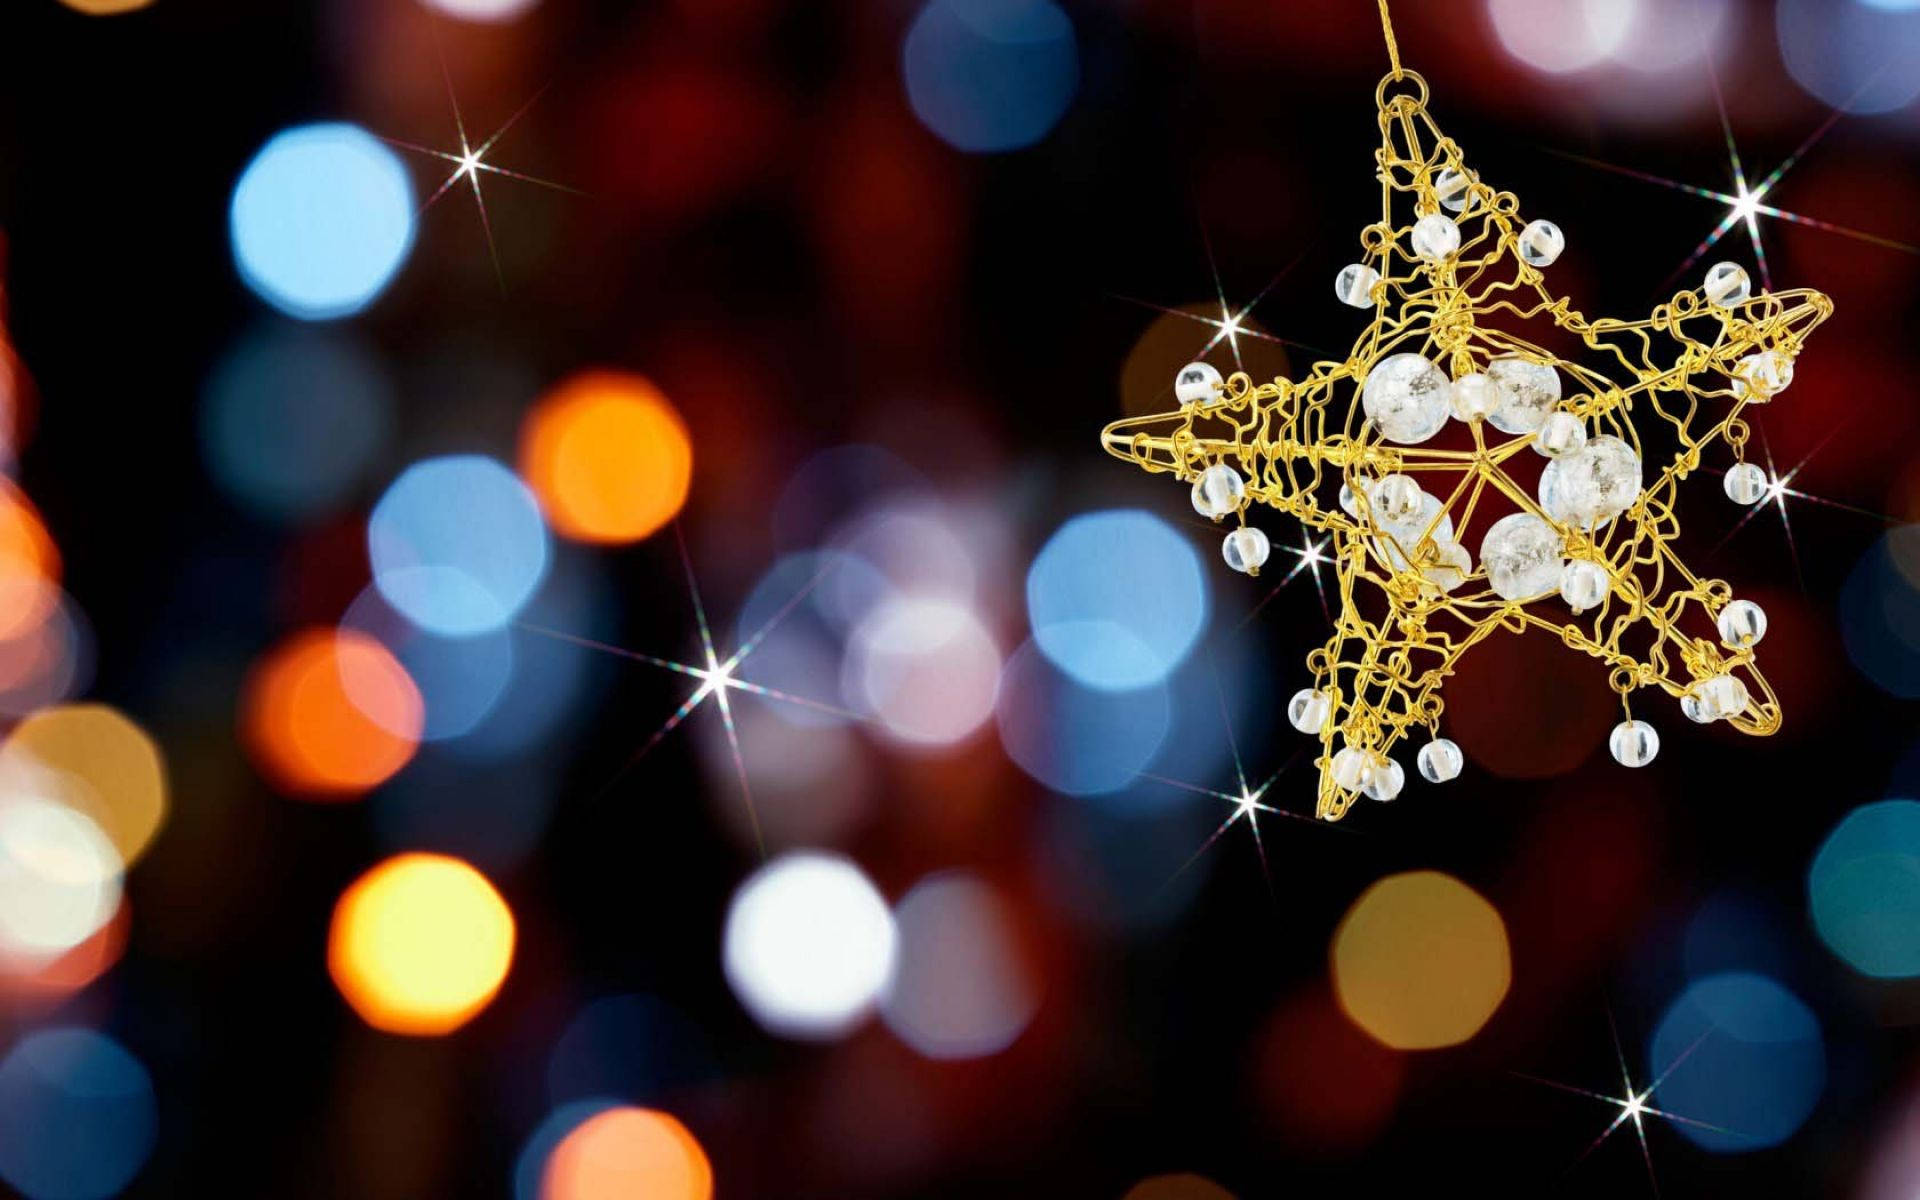 Extravagant Golden Star Shining Brightly For The New Year Background